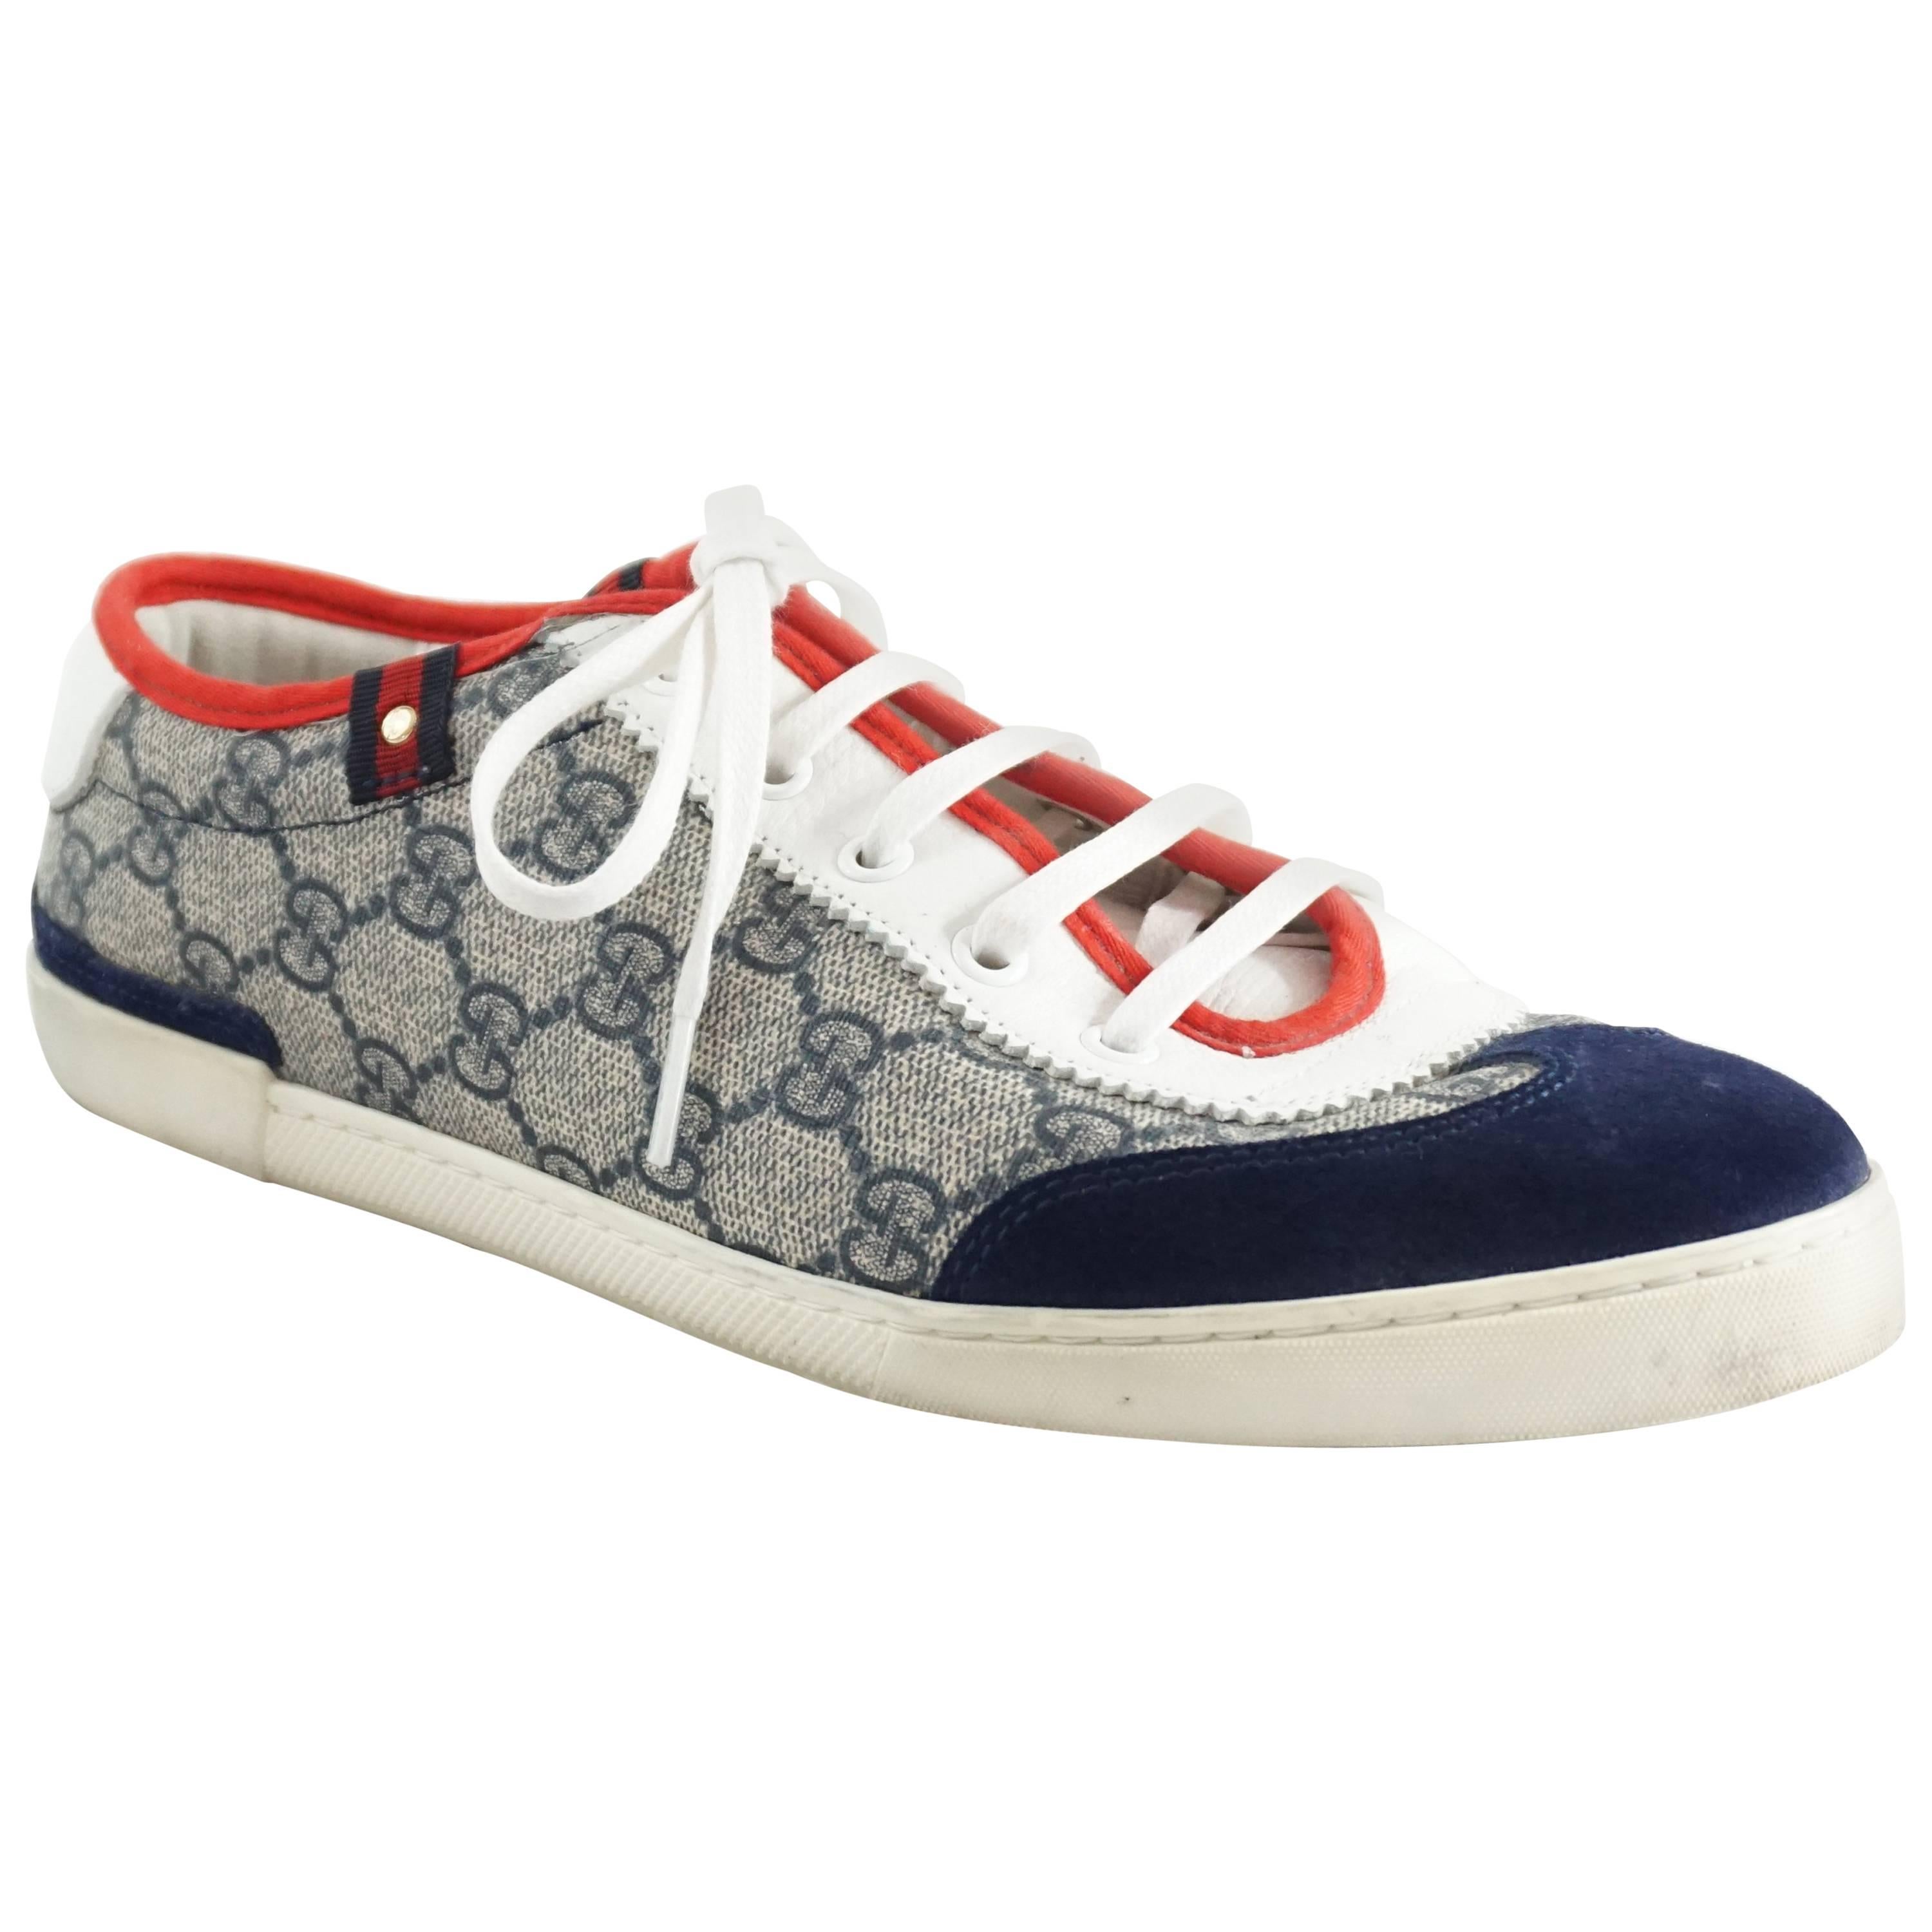 Gucci Red, White, and Blue Monogram Sneakers - 39